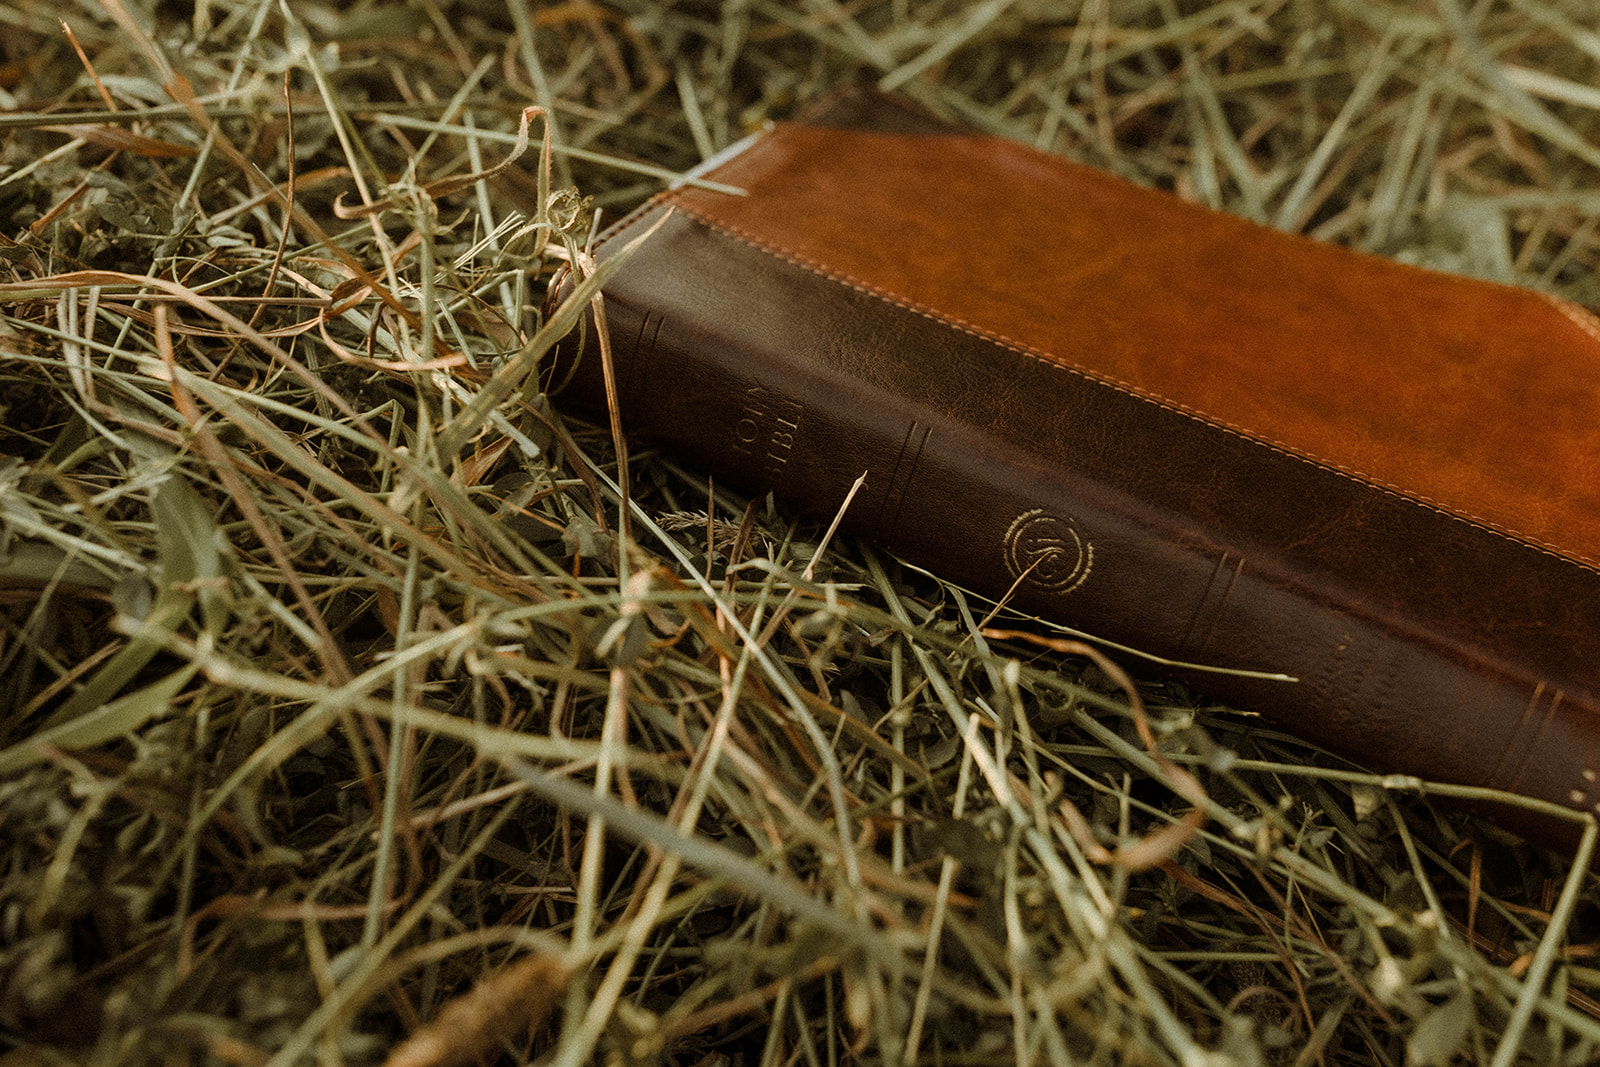 Bible lying in a field during golden hour couples photoshoot!